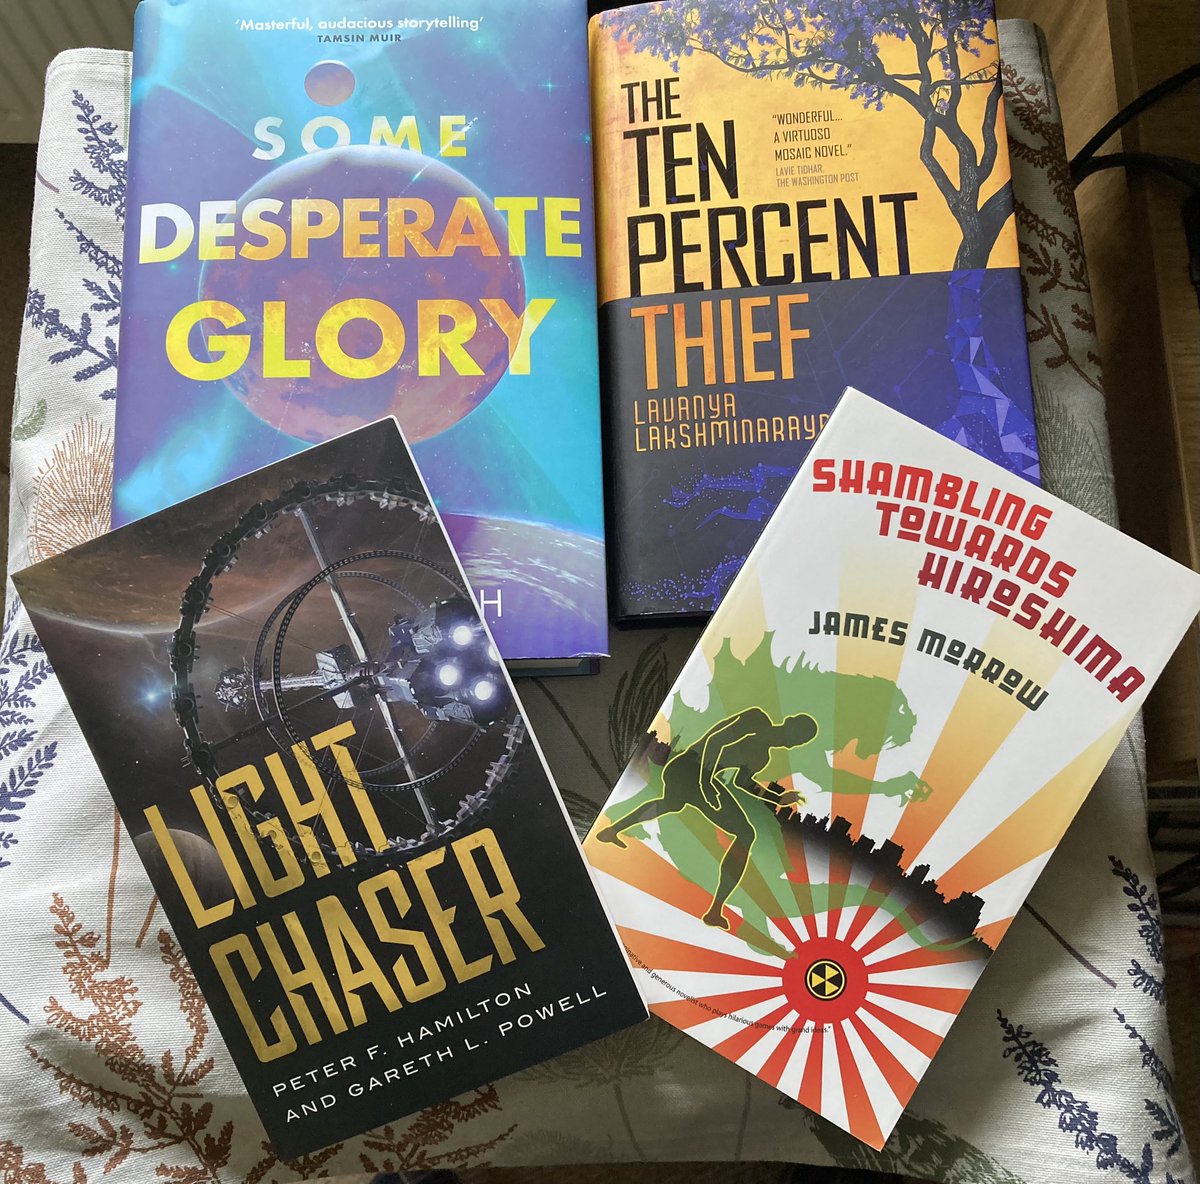 Second part of todays books:

Some Desperate Glory by Emily Tesh

The Ten Percent Thief by Lavanya Lakshminarayan

Light Chaser by Peter Hamilton and Gareth Powell

Shambling Towards Hiroshima by James Morrow